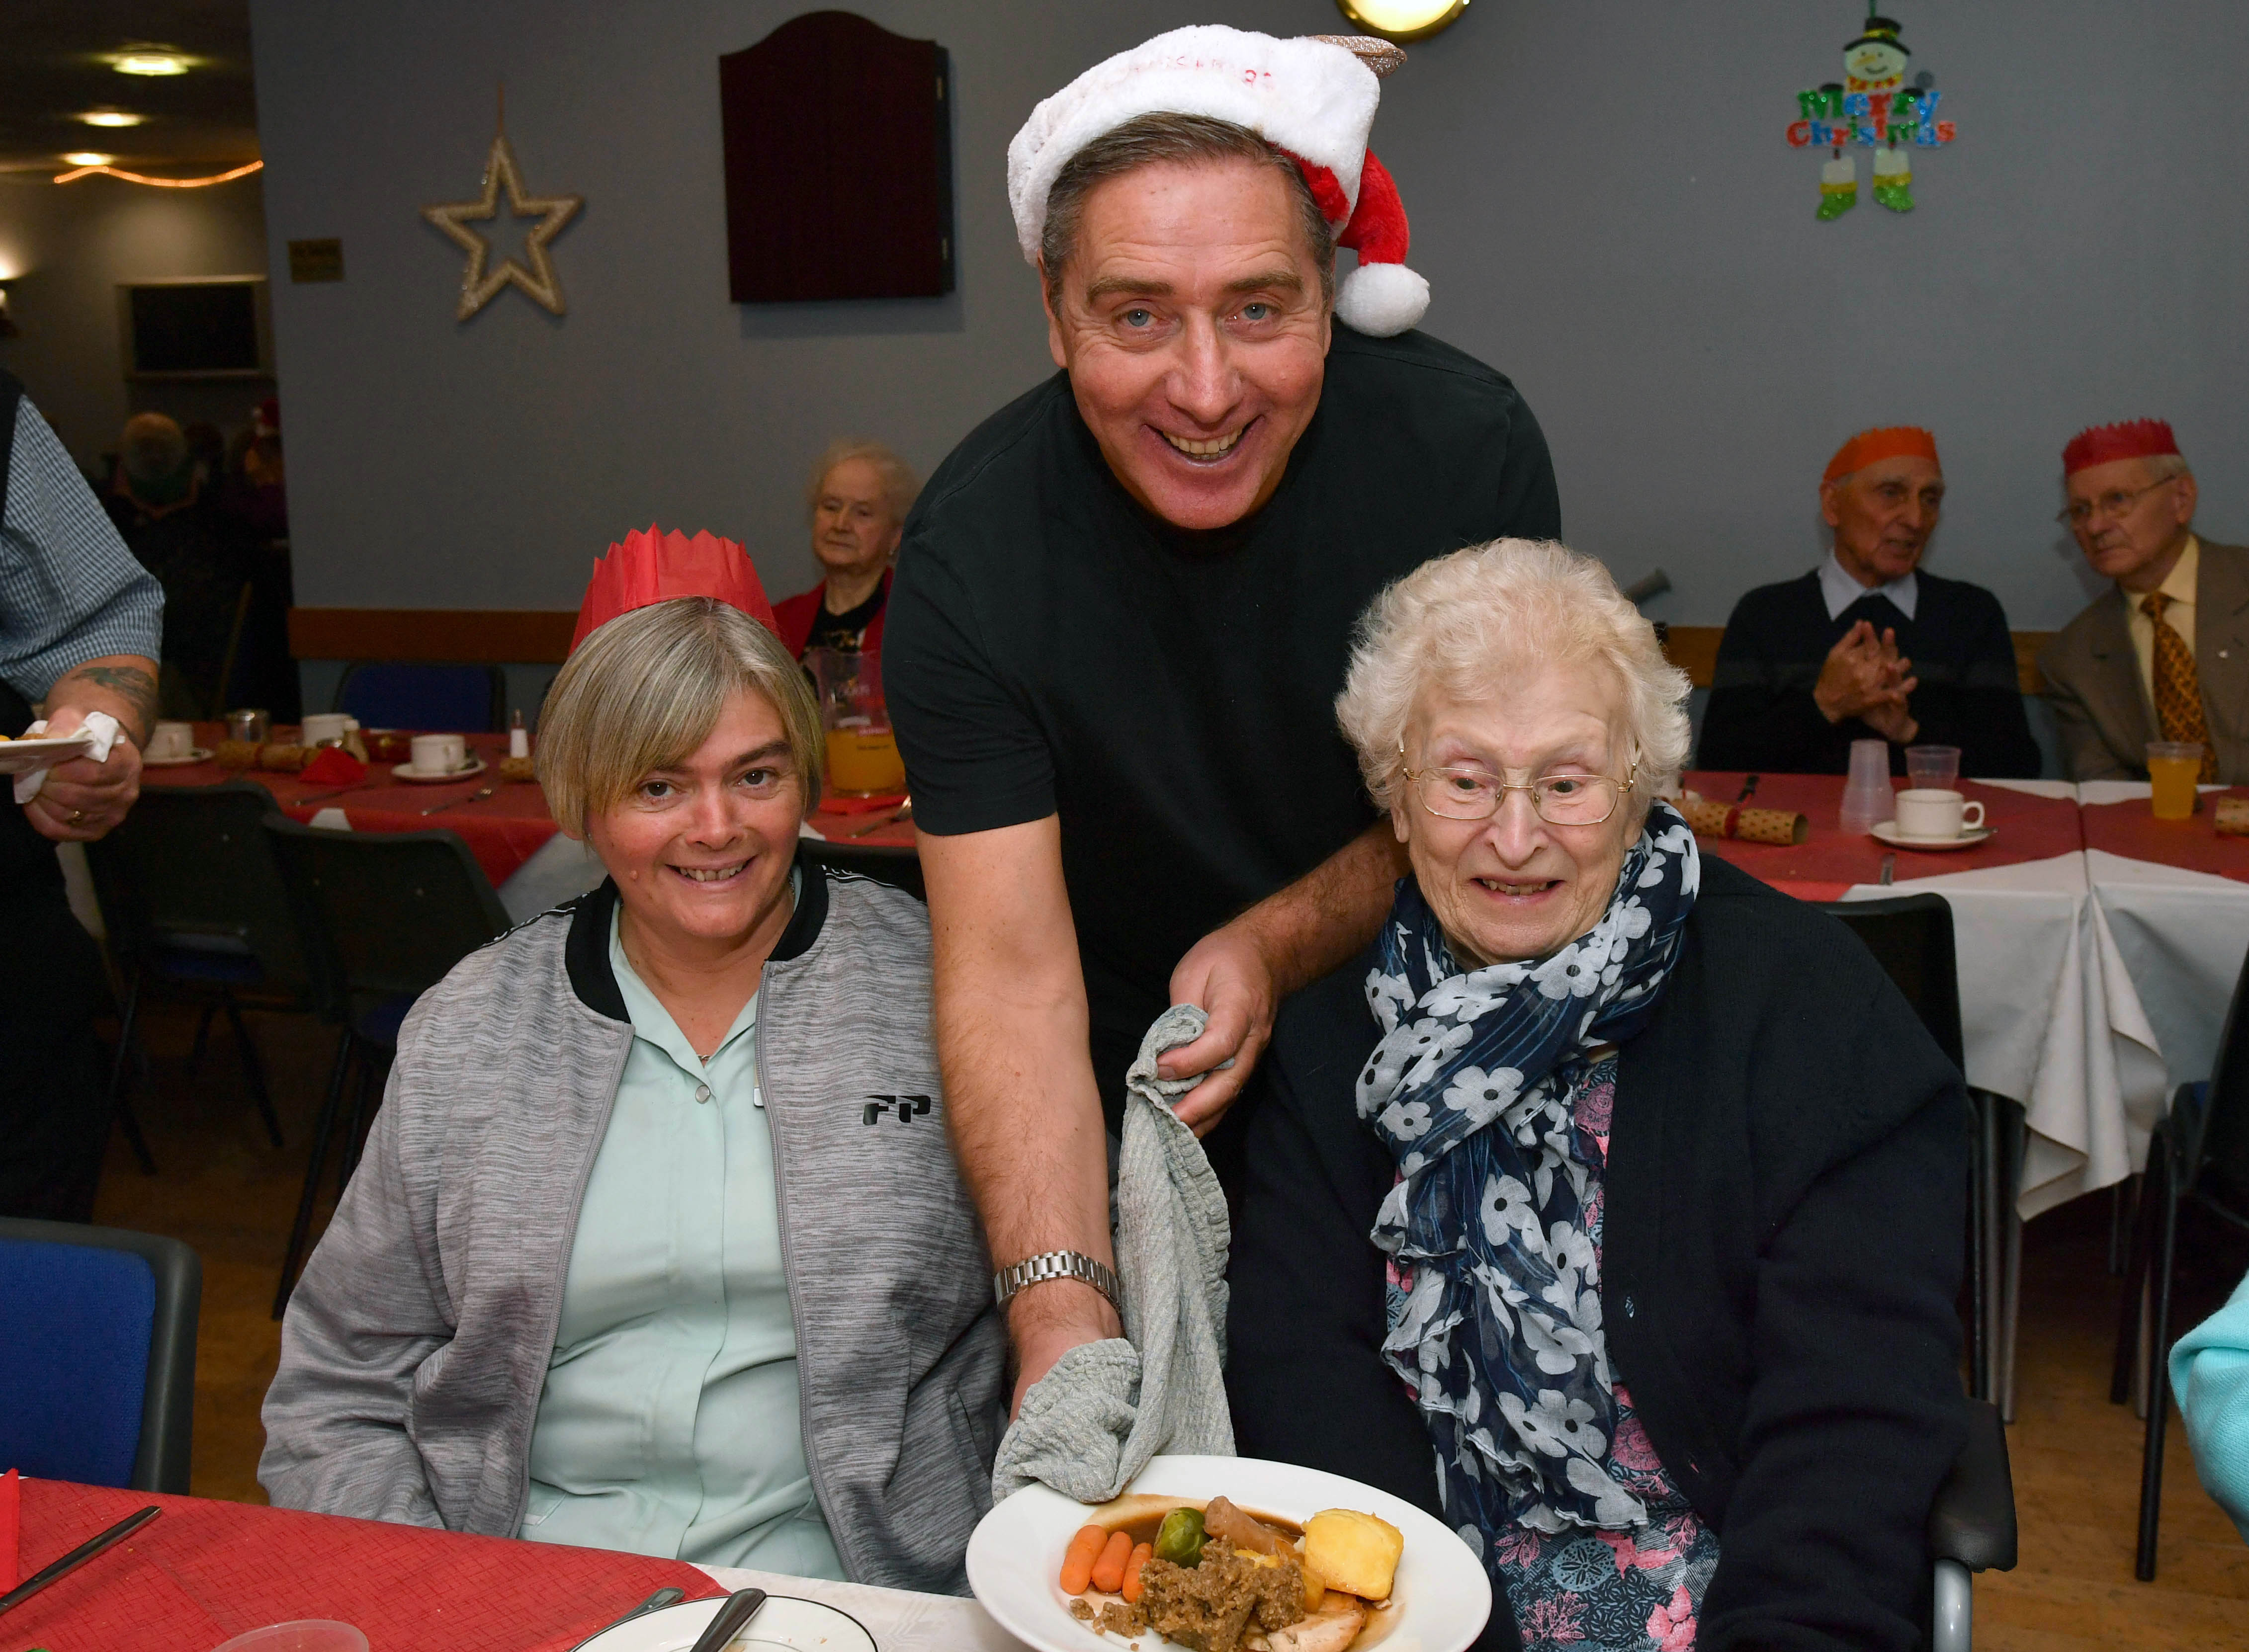 PETERHEAD FC MANAGER JIM MCINALLY SERVES CHRISTMAS DINNER TO  MORAG MCBAIN (L) AND JENNY RITCHIE AT THE CLUBS ANNUAL LUNCH FOR LONELY PEOPLE.